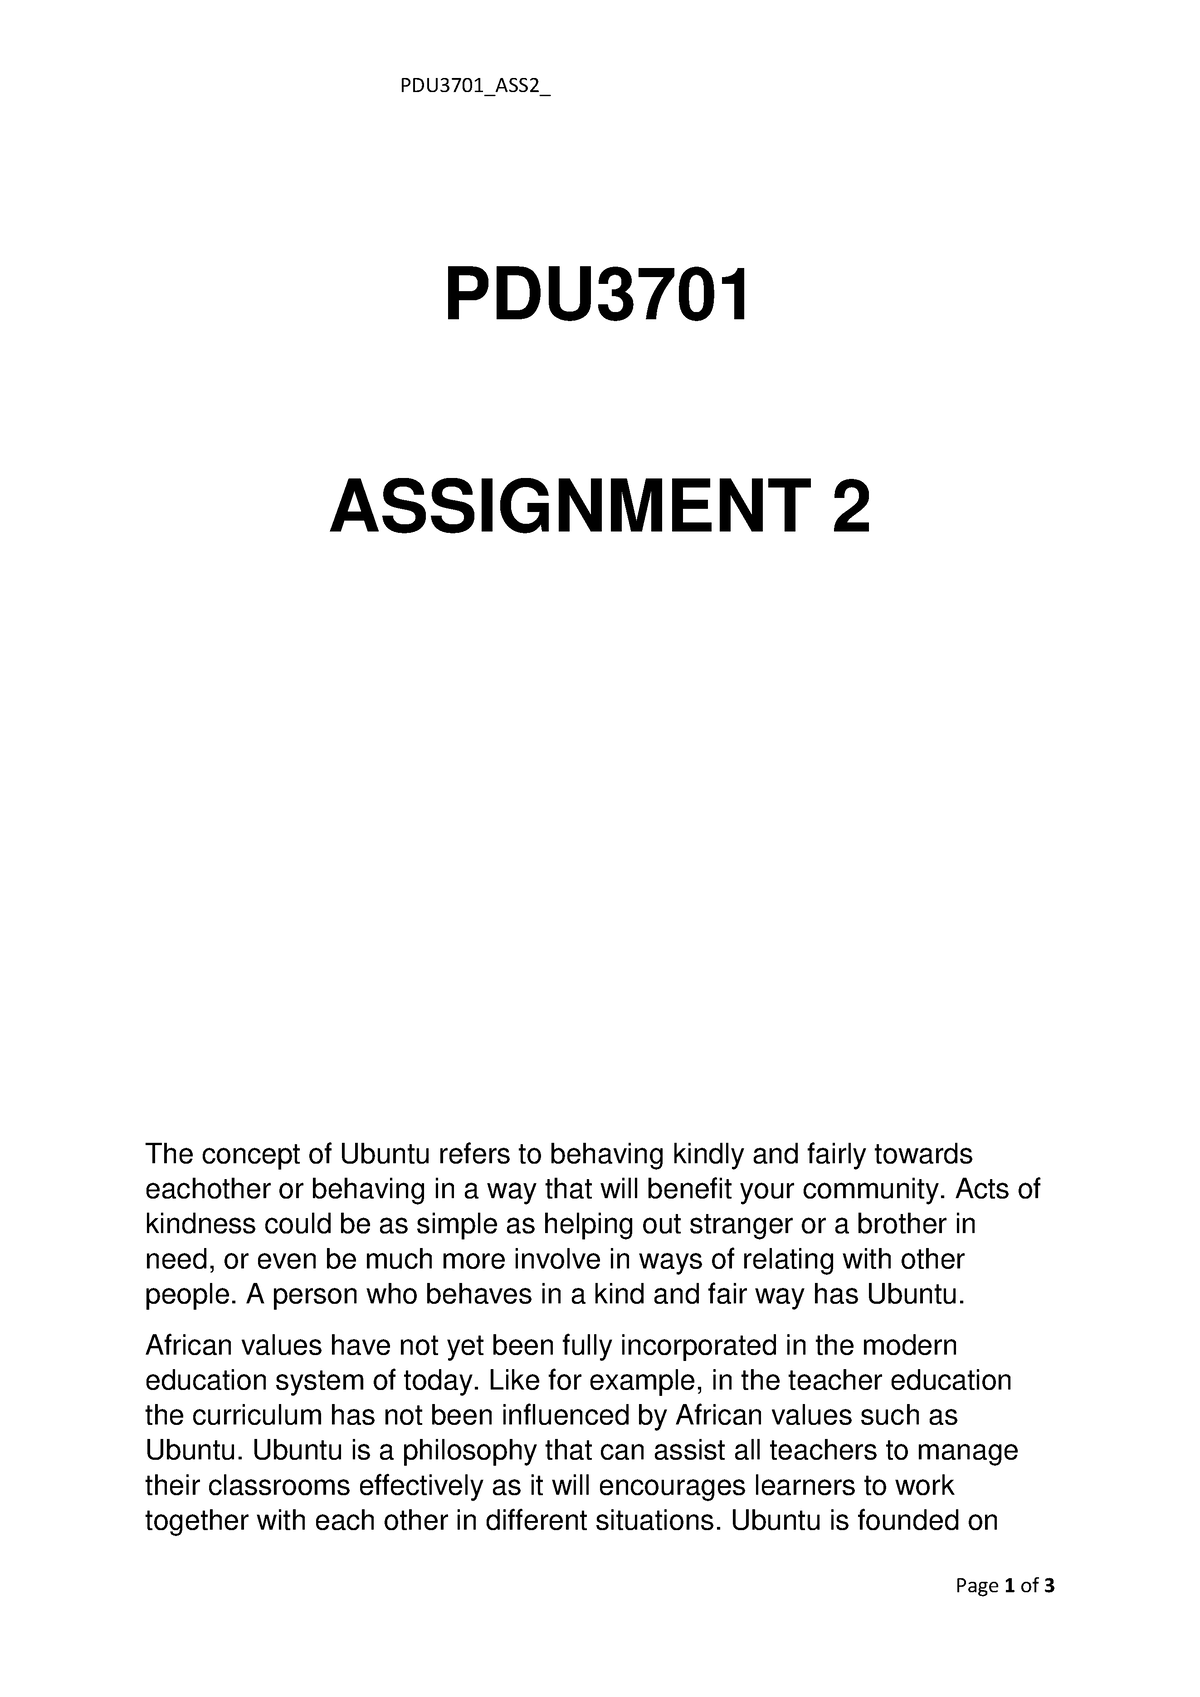 pdu3701 assignment 1 answers